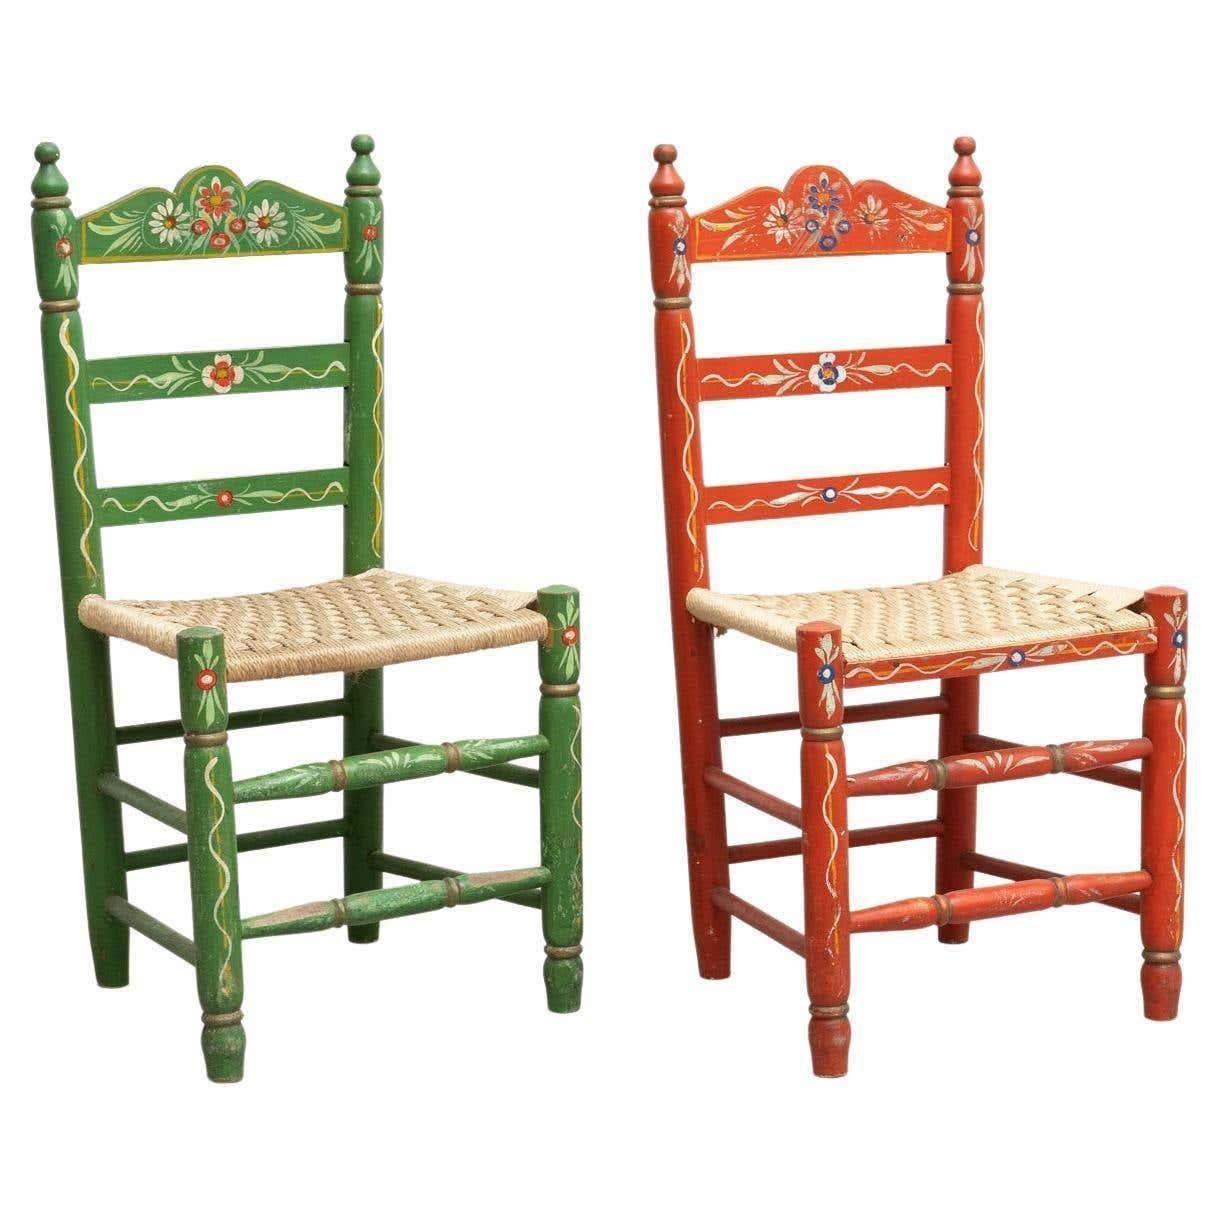 Set of Two Rustic Traditional Hand Painted Wood Chairs, circa 1940 For Sale 14